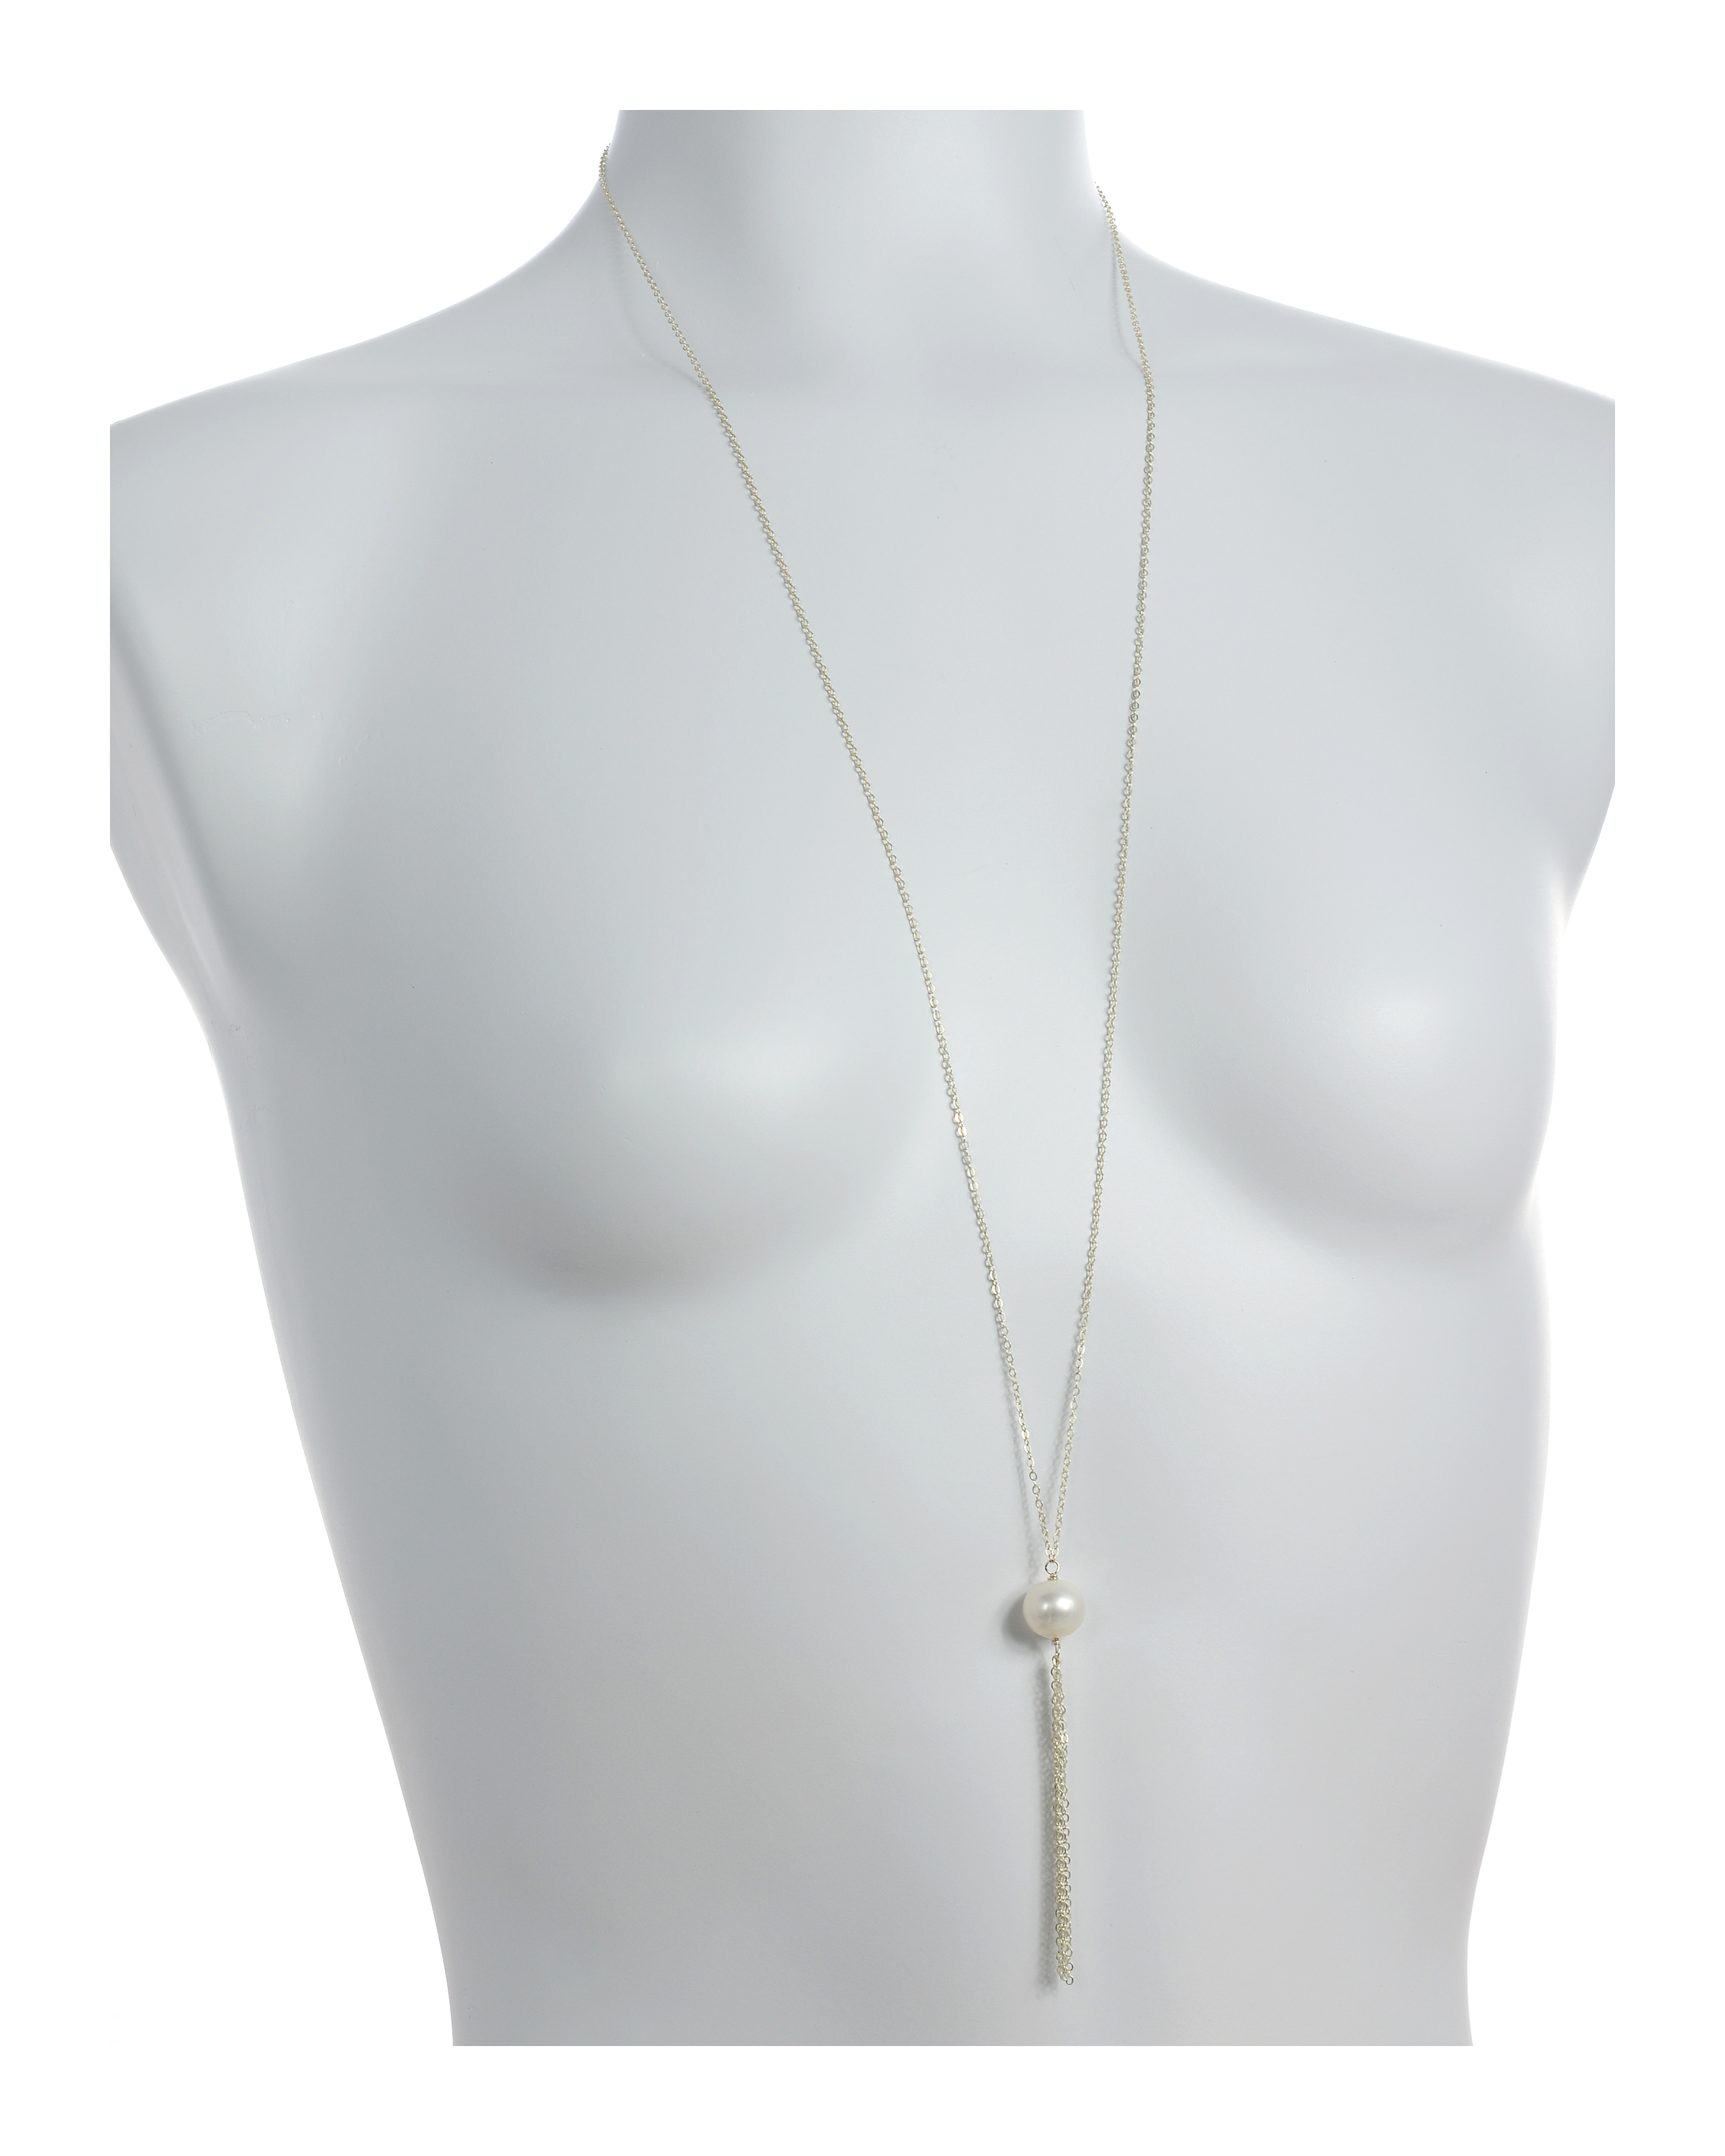 Mannequin wearing the Naughton Braun Kensington - Pearl Necklace named in honor of Princess Diana